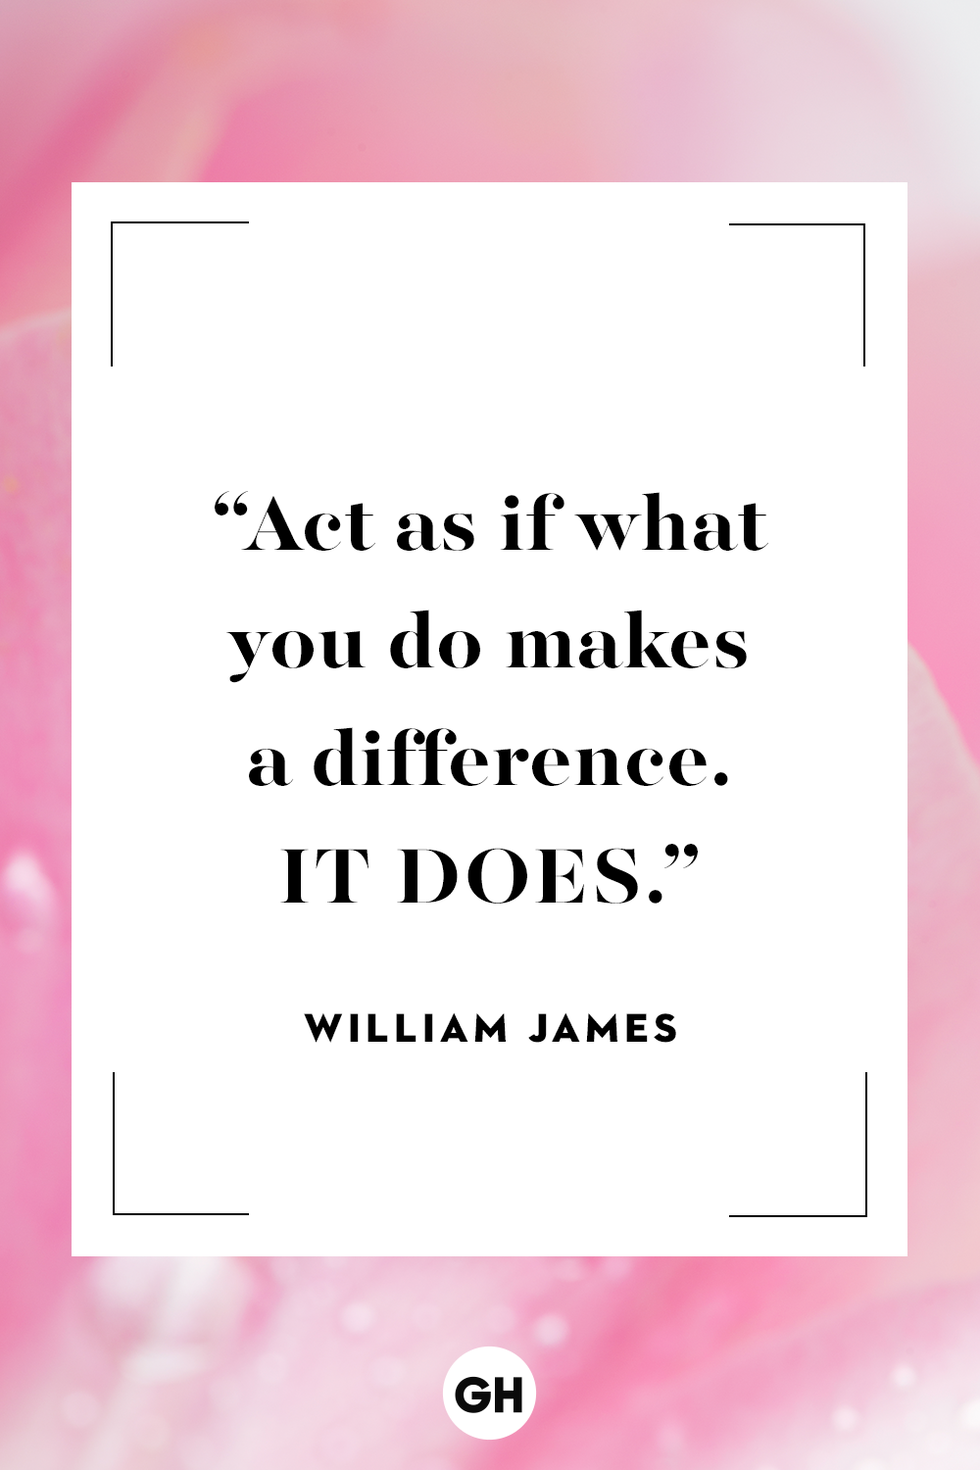 Act as if what you do makes a difference. IT DOES.